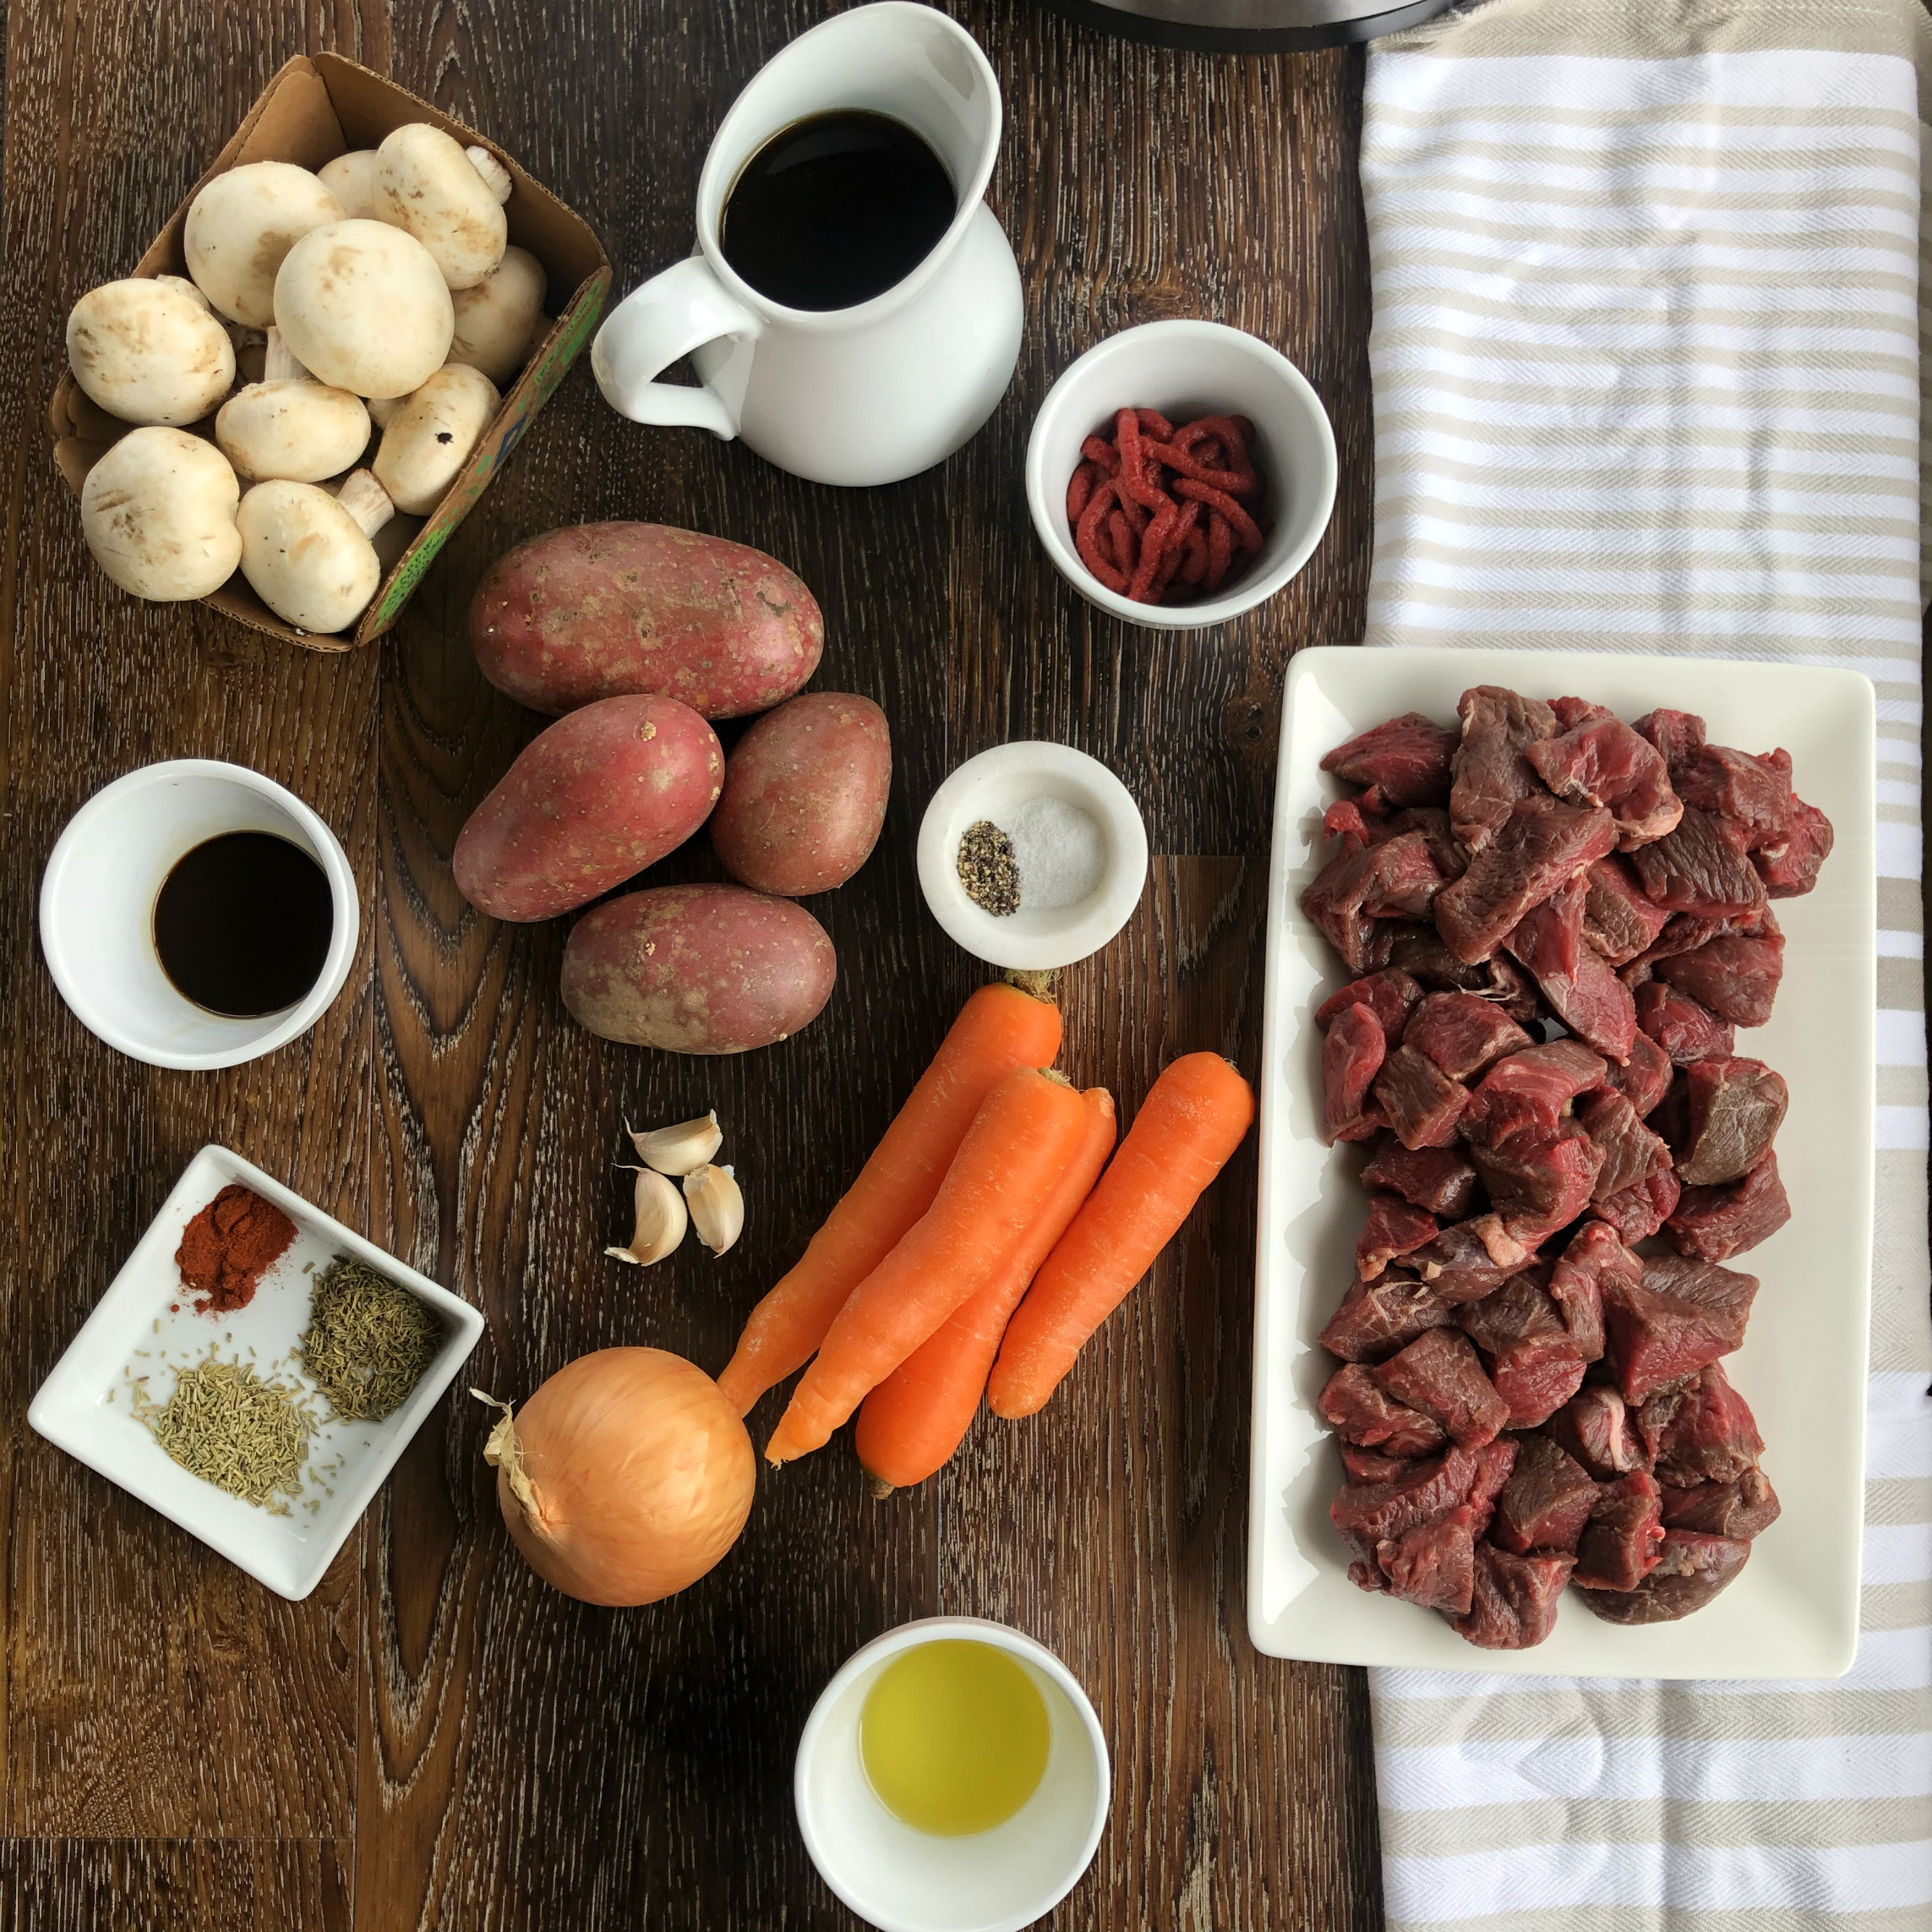 Ingredients for Beef Stew